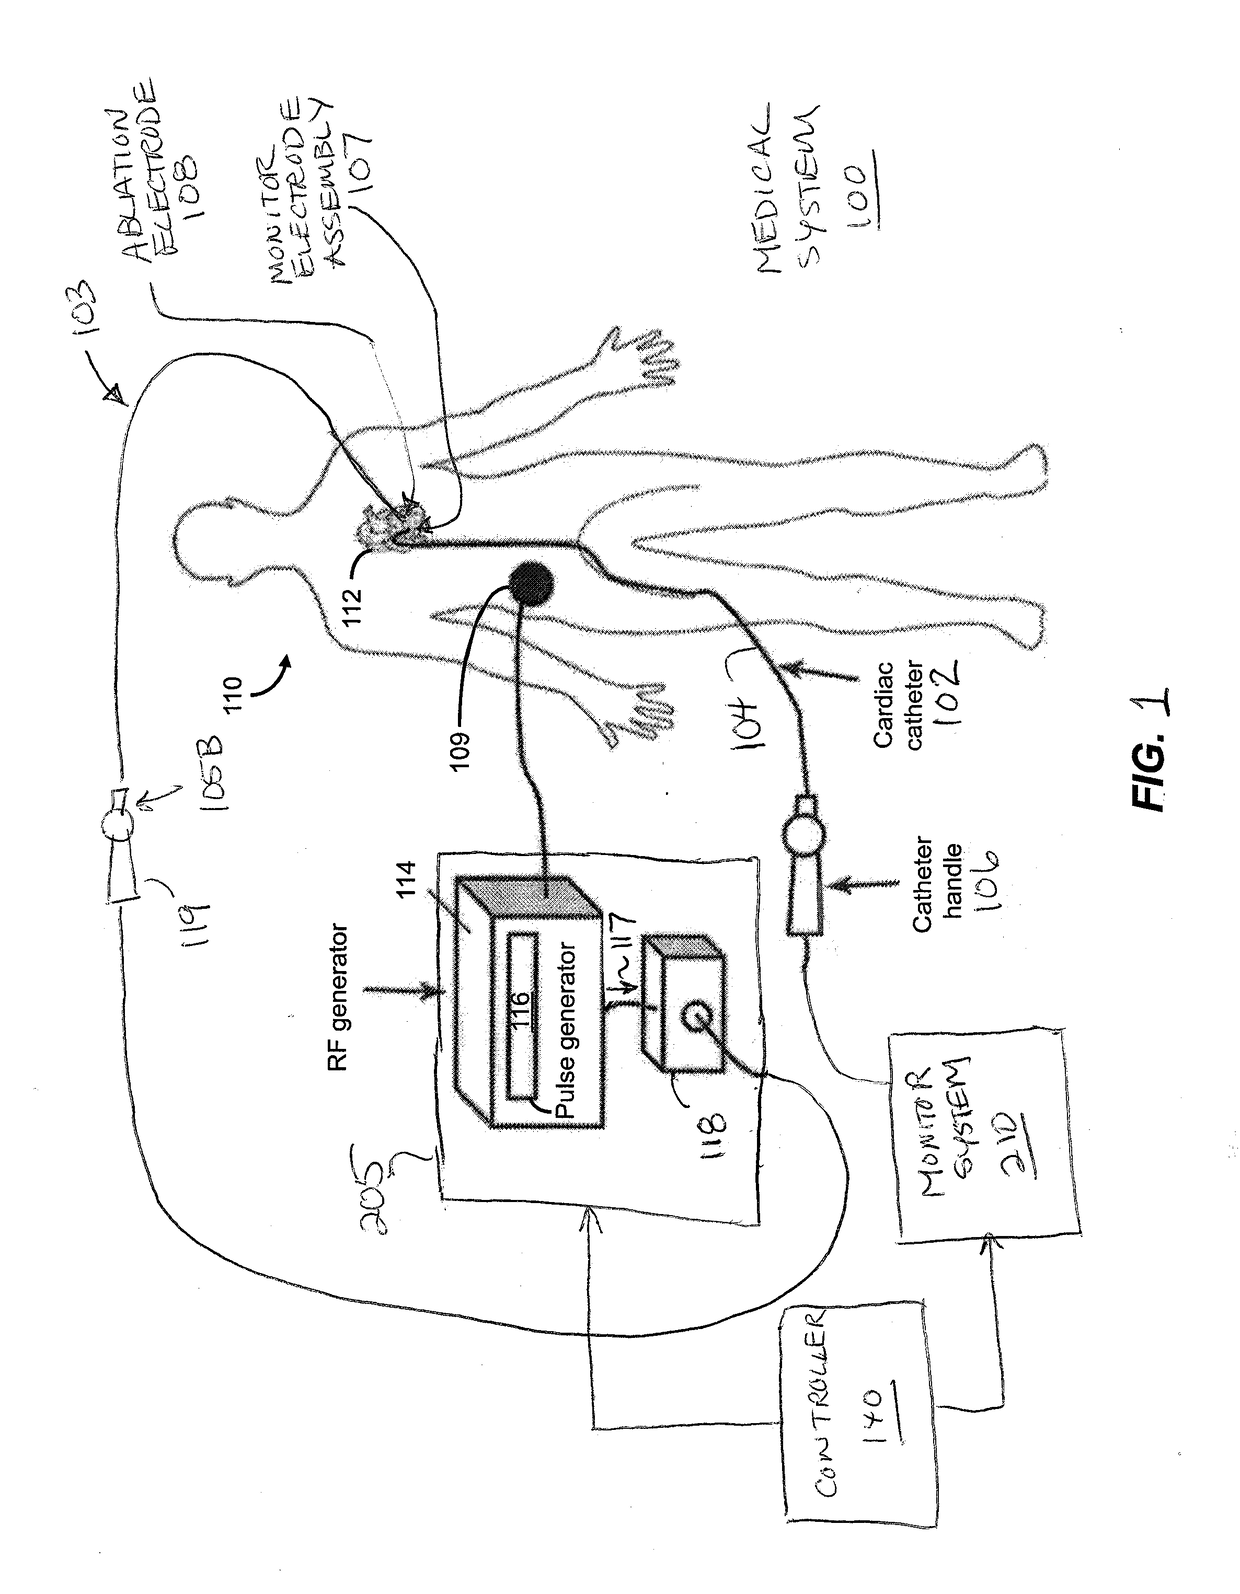 Coordination/control of multiple medical devices at a site